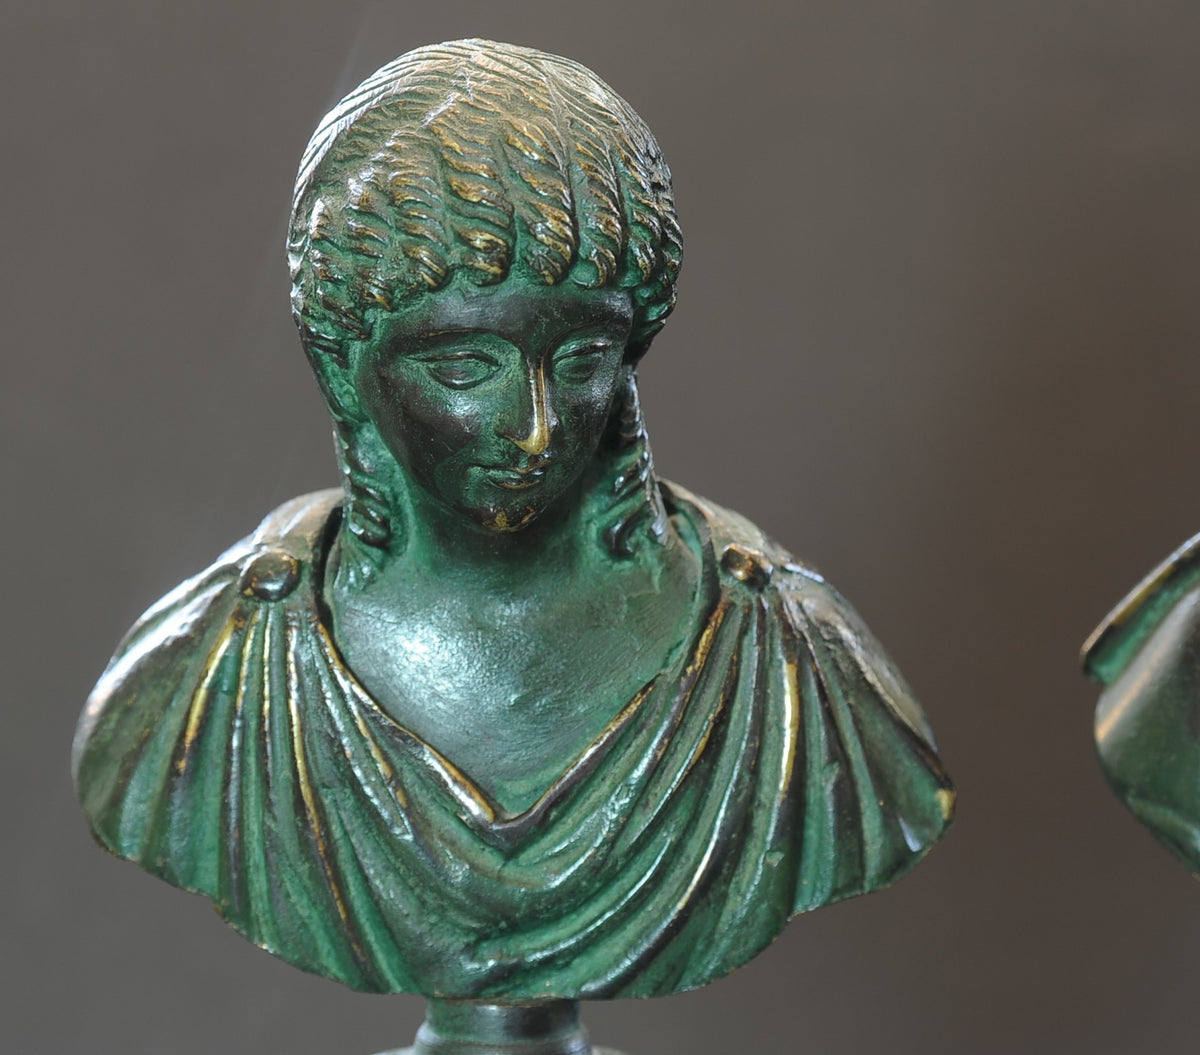 Two Greco-Roman Style Busts